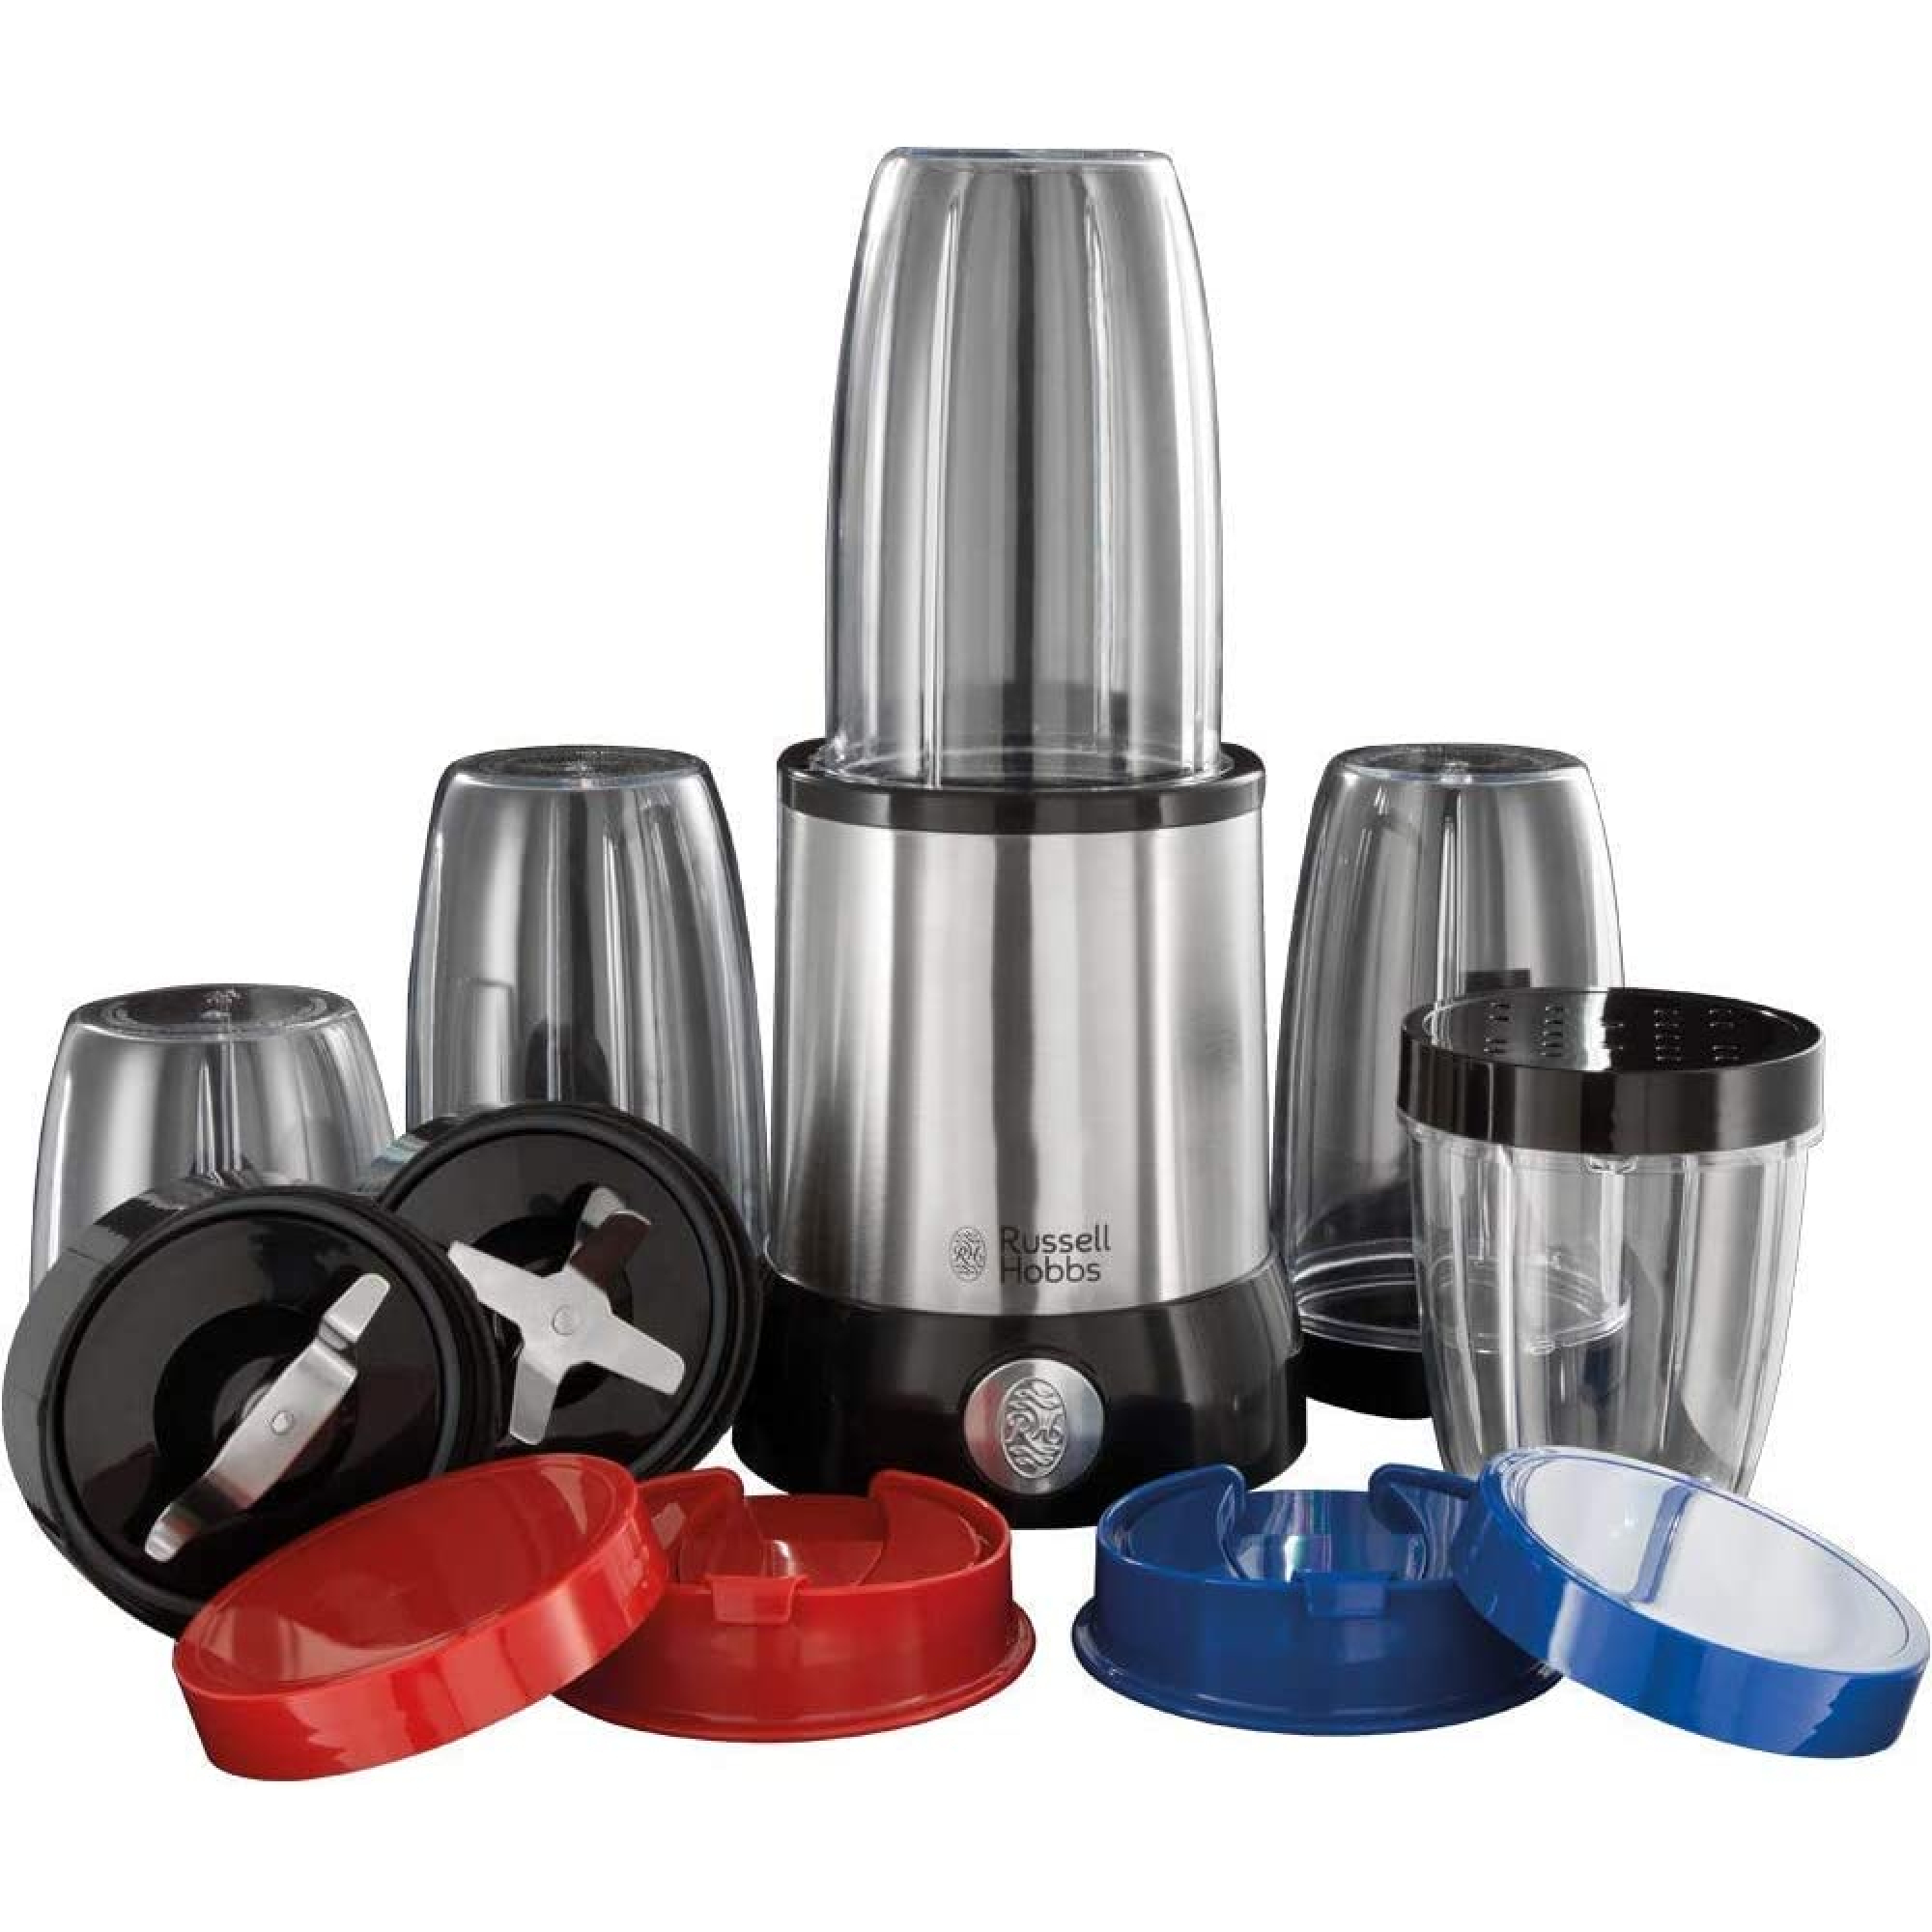 Russell Hobbs Boost Food 700W, 15 Pieces Set - Dirhami